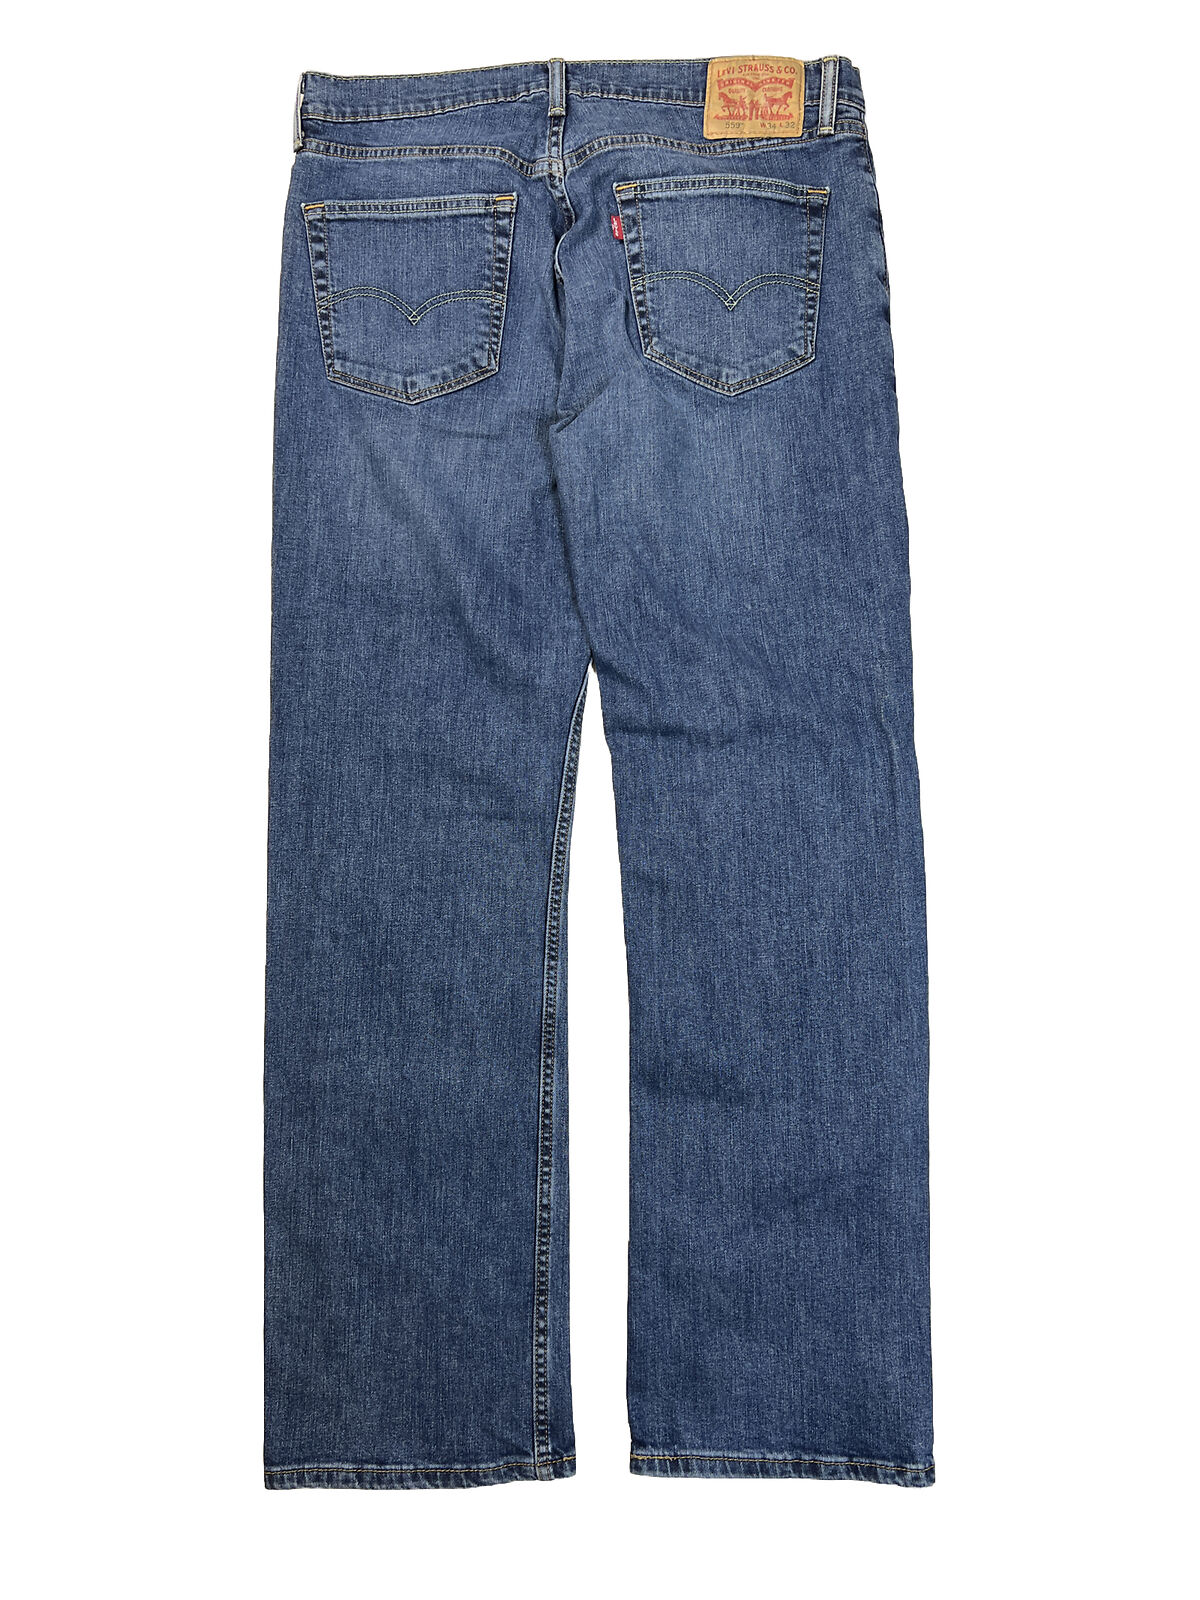 Levi's Men's Medium Wash 559 Relaxed Straight Jeans - 34x32